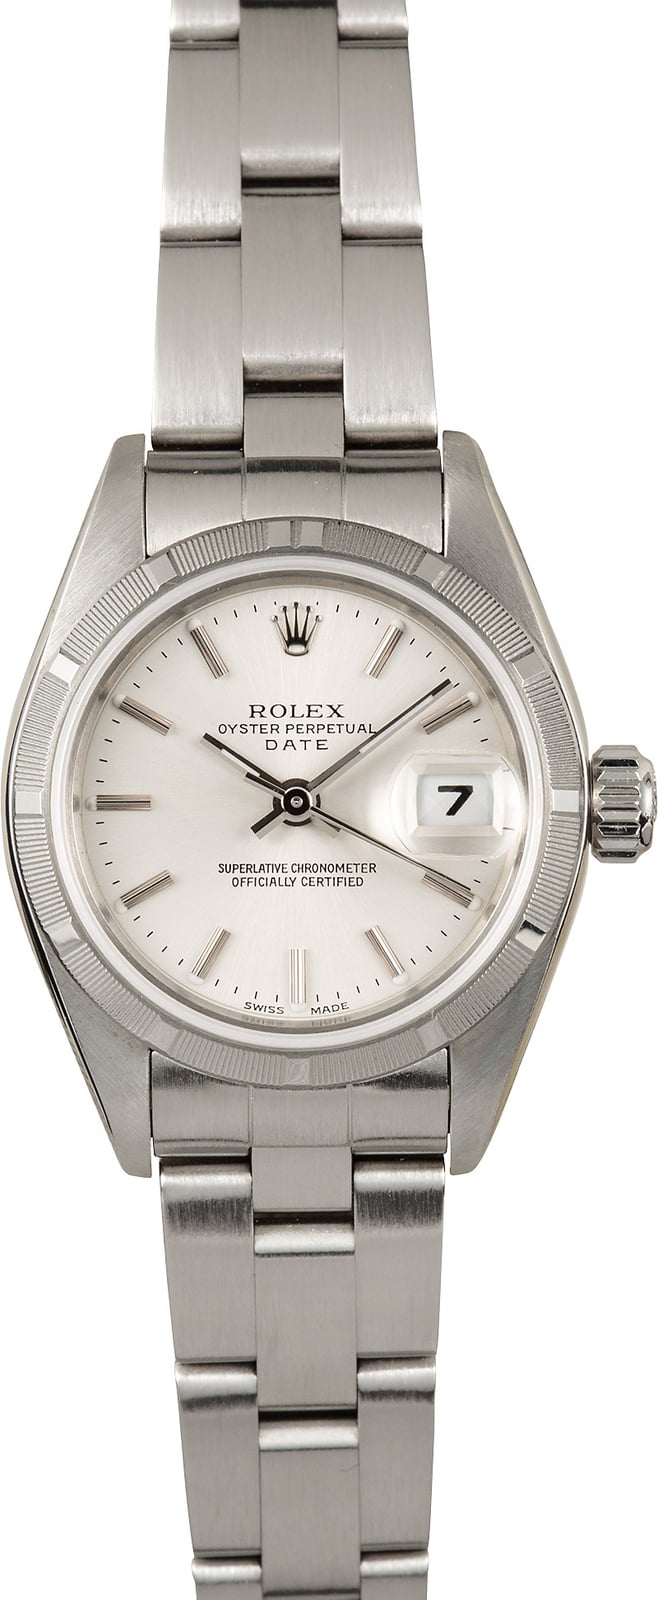 Buy Used Rolex 79190 | Bob's Watches 